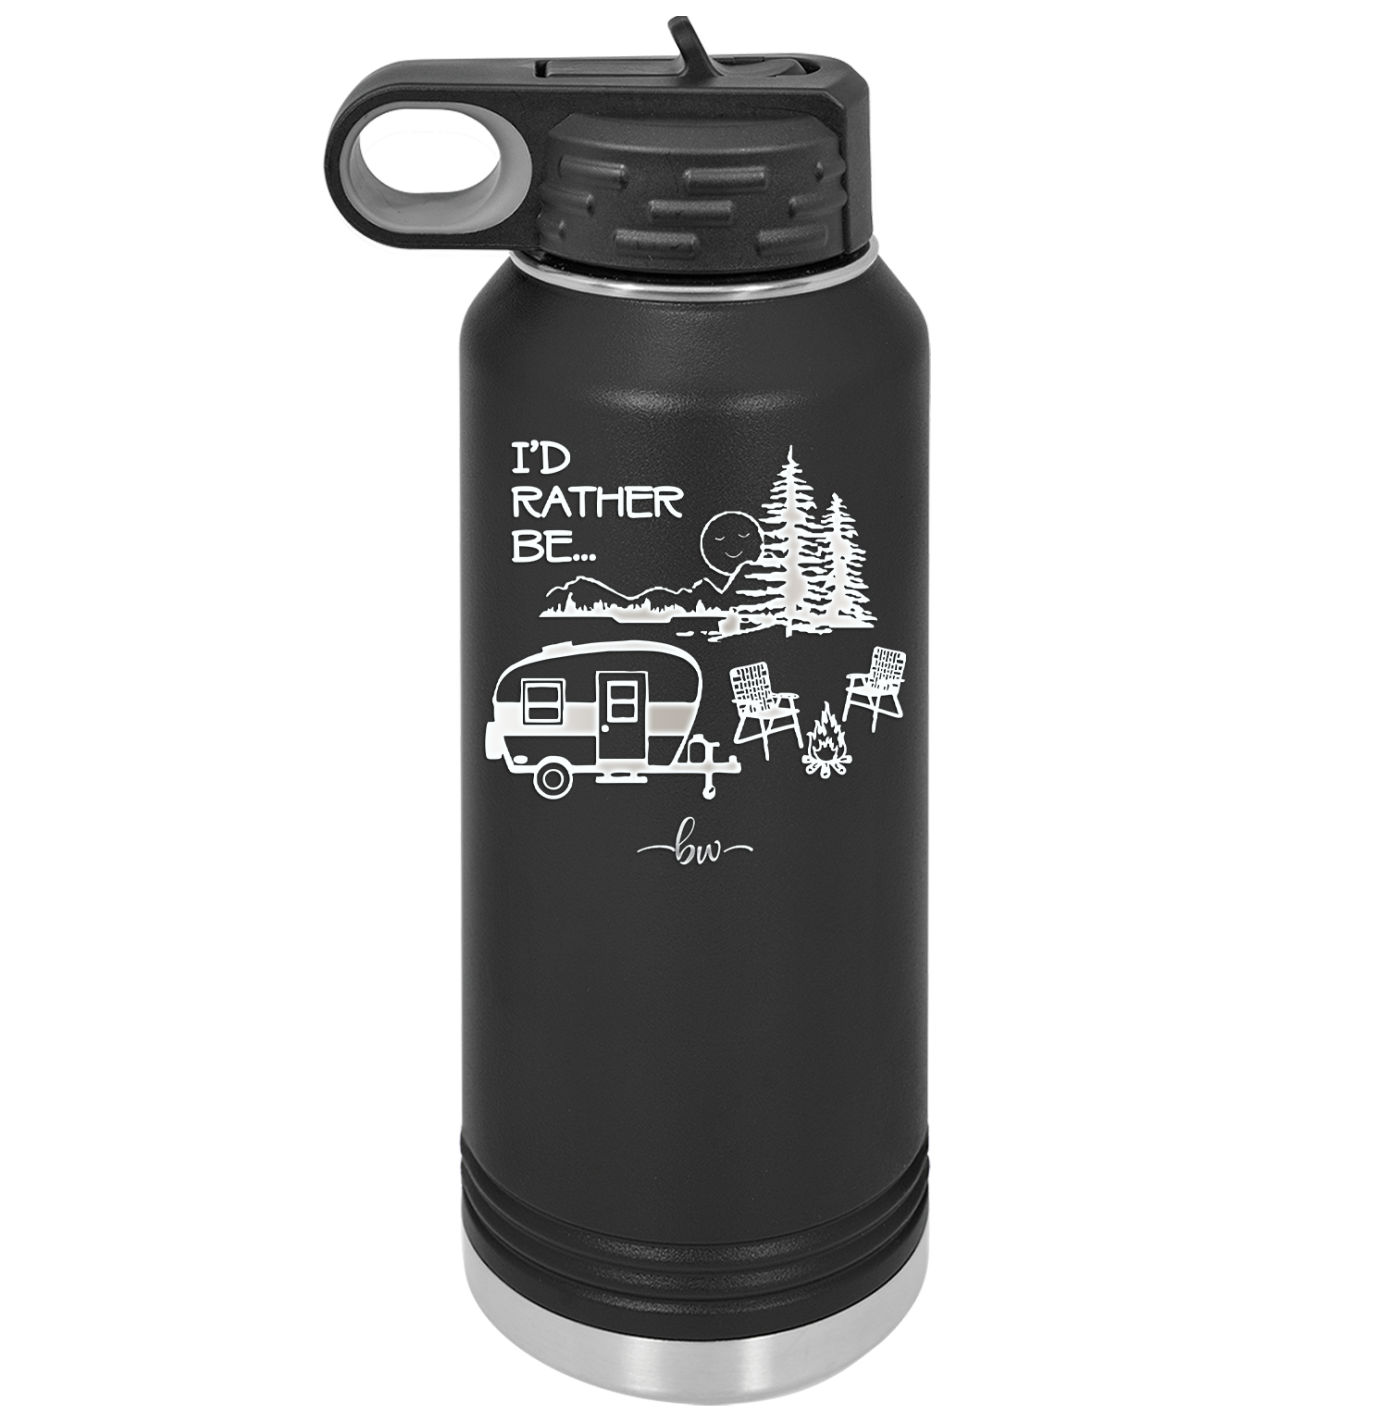 I'd Rather be Camping with Mountians - Laser Engraved Stainless Steel Drinkware - 1727 -